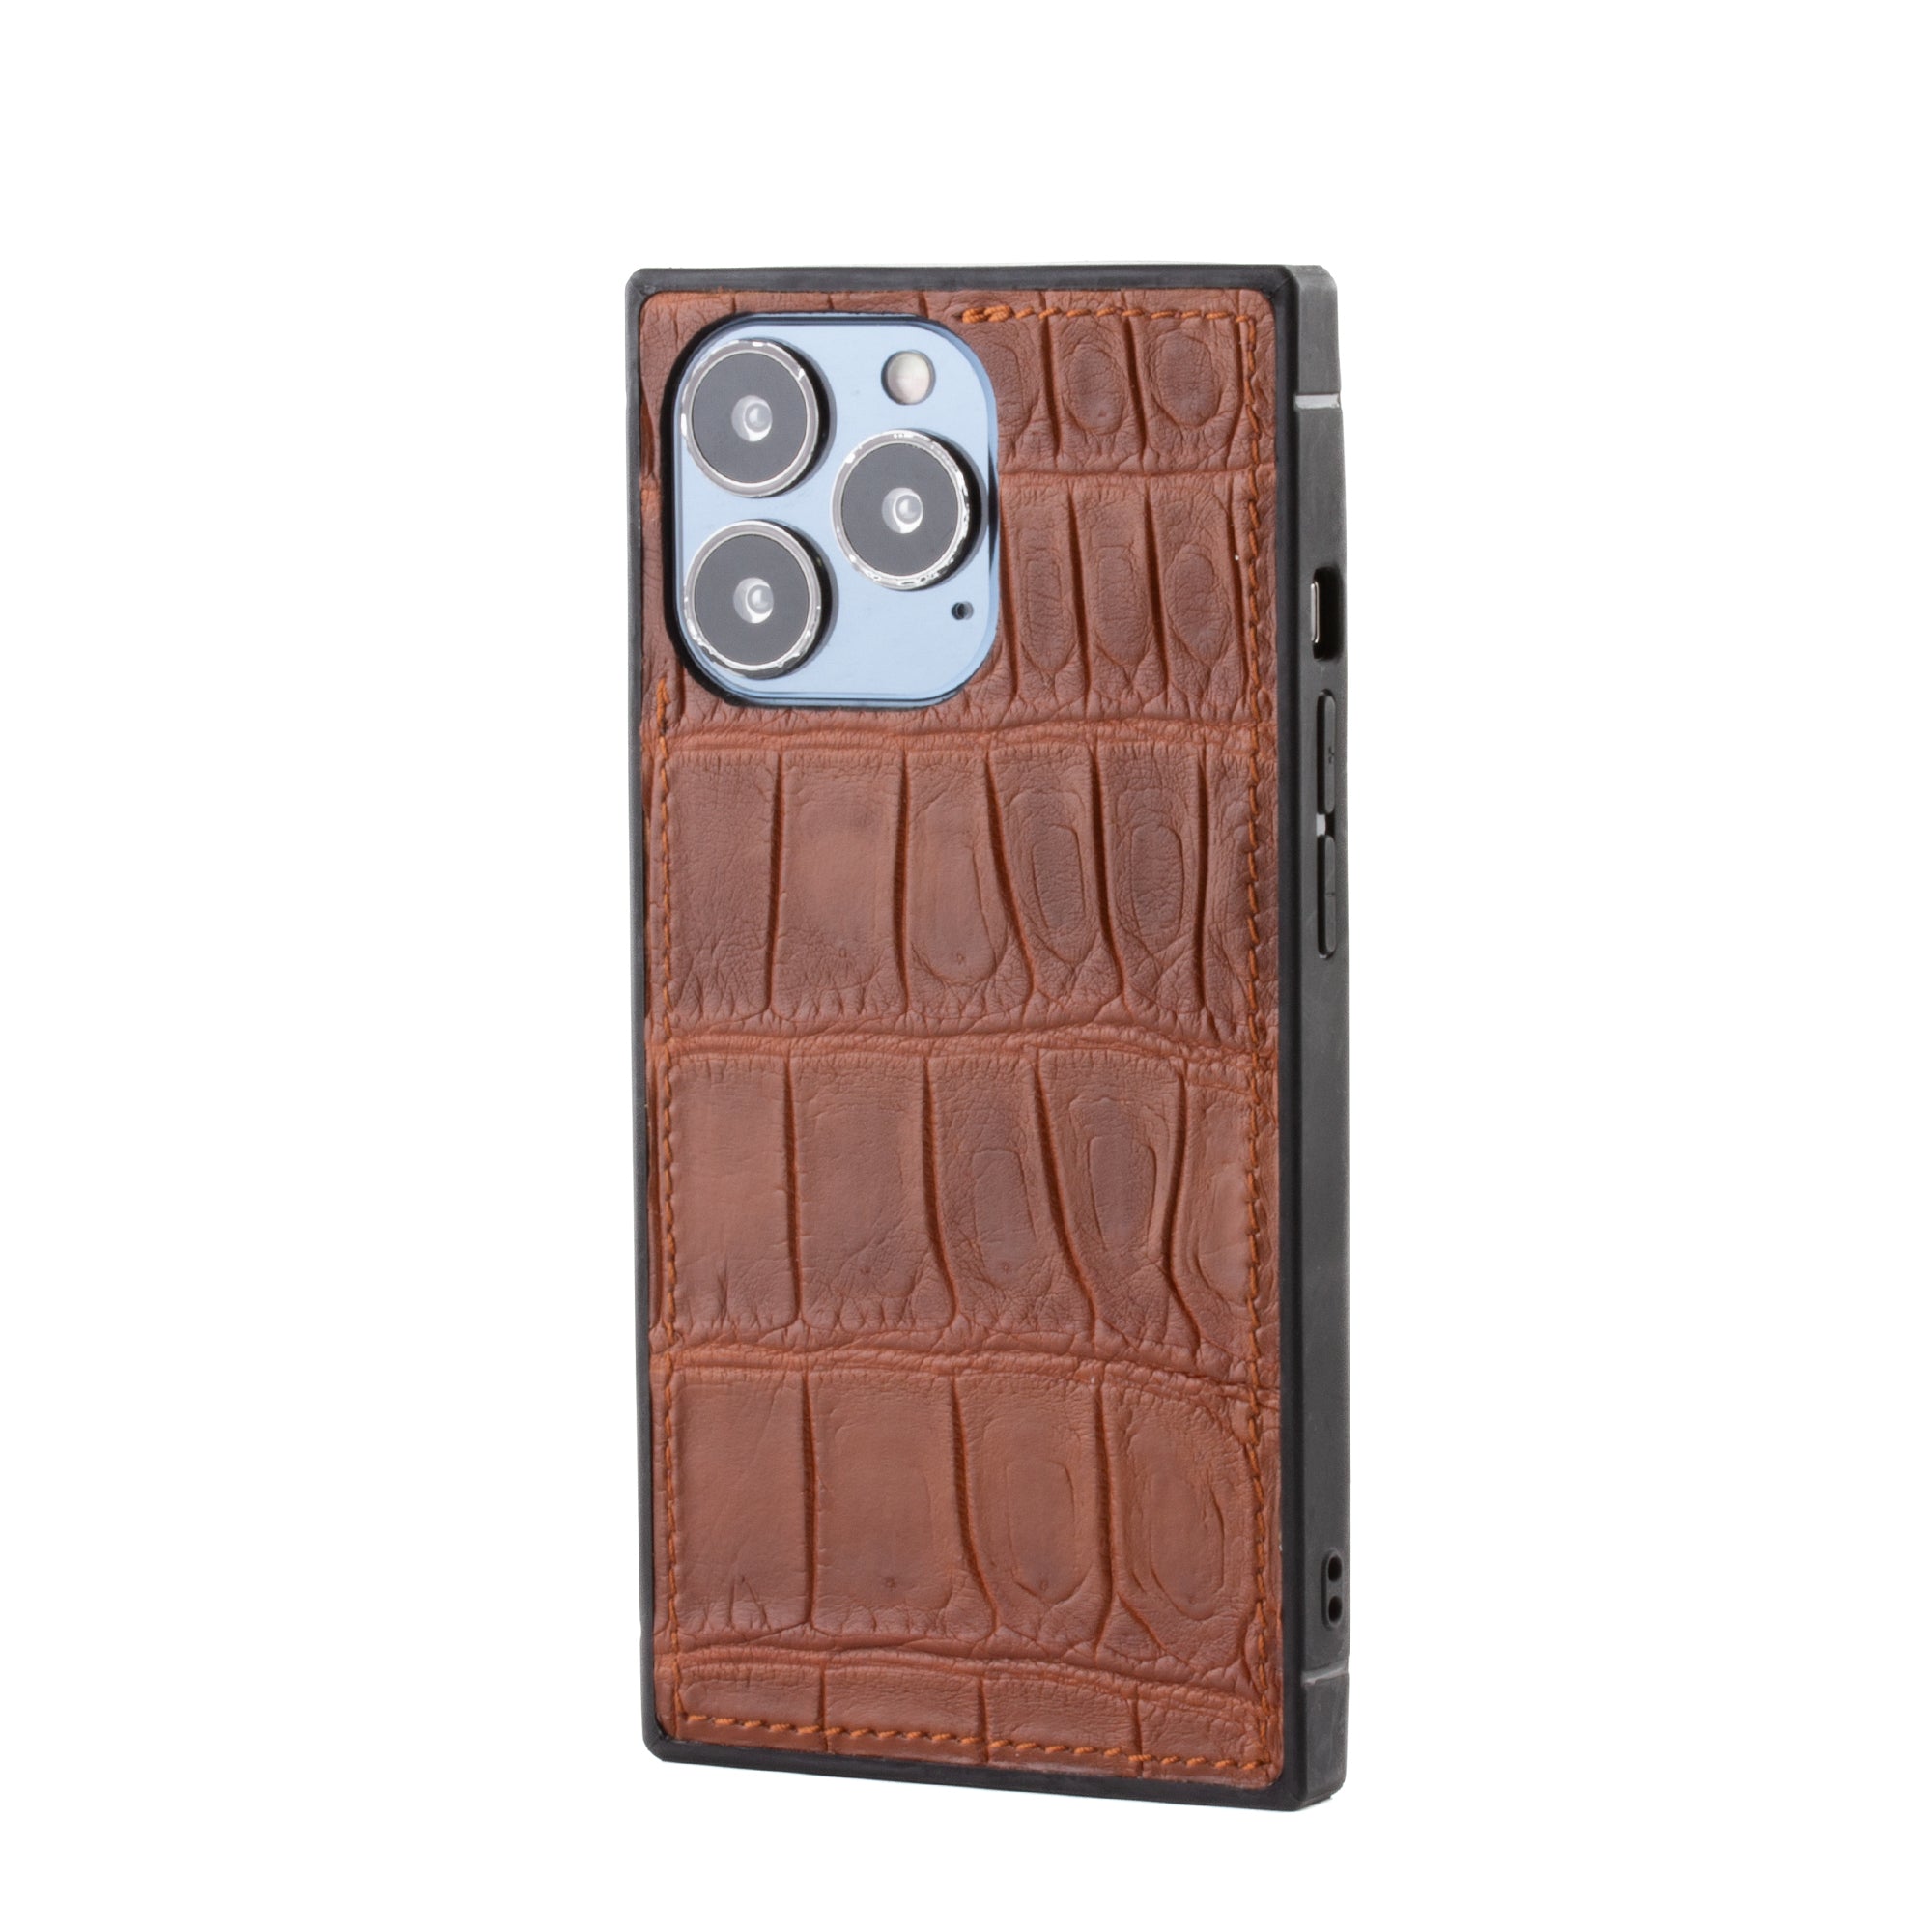 Clearance Sale - Leather iPhone "Square Case" - iPhone 13 Pro - Brown alligator 2